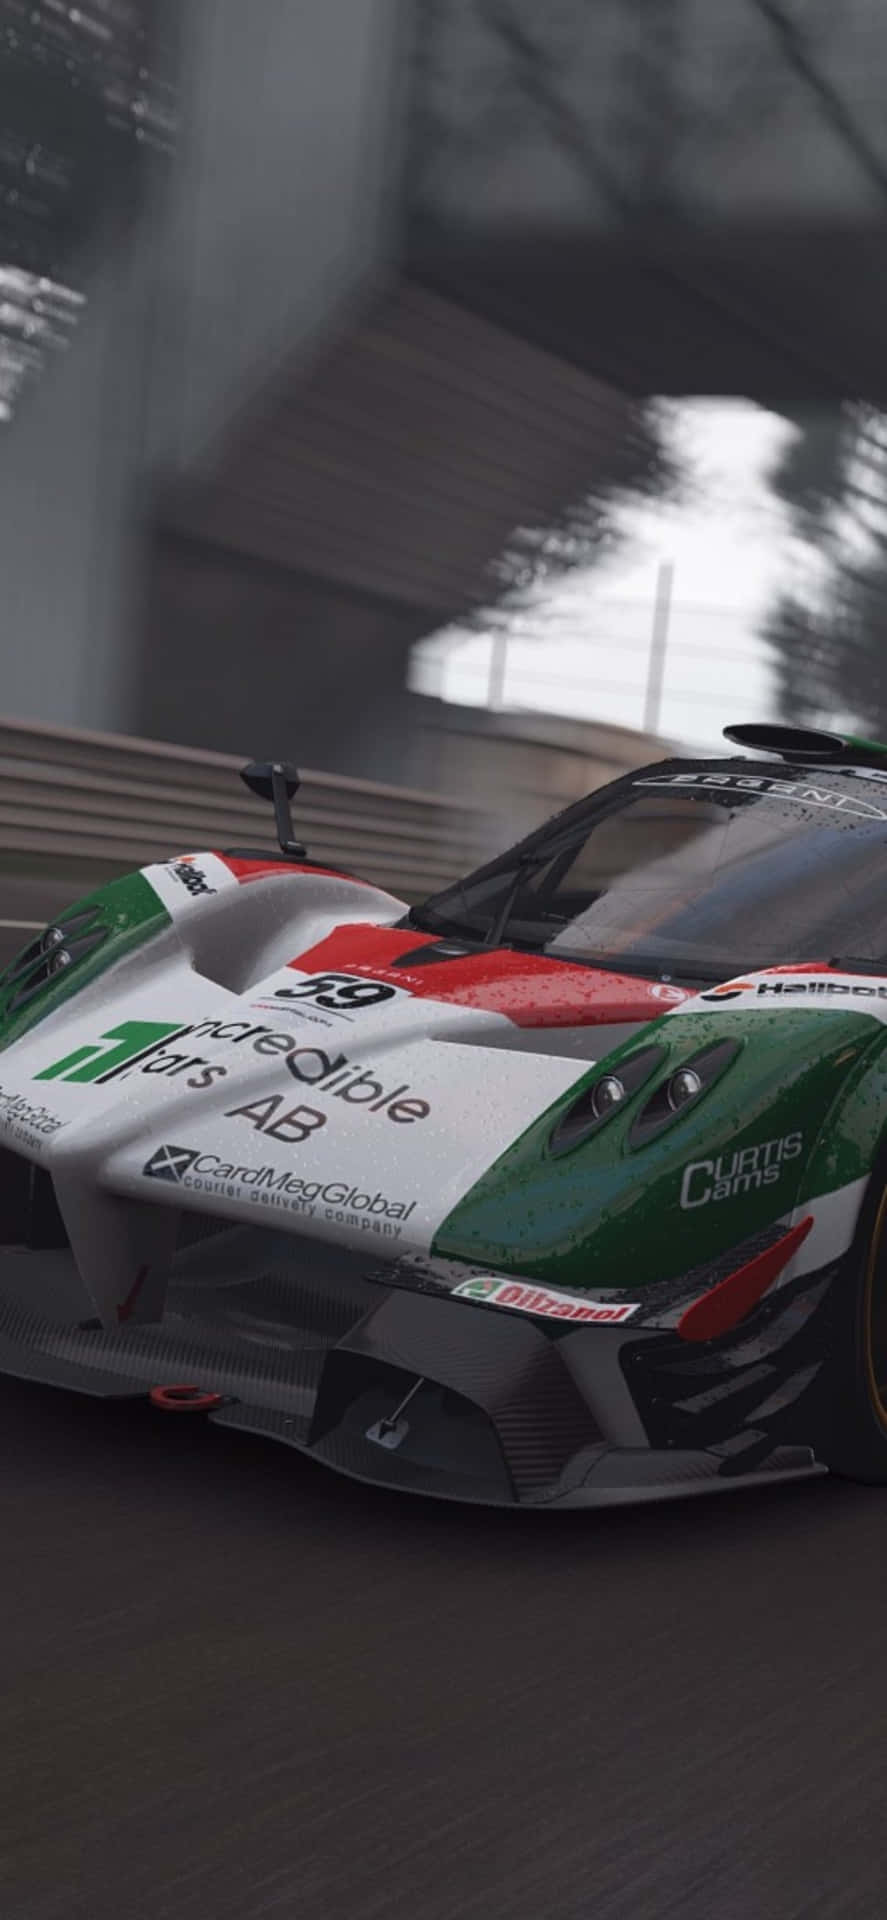 Iphone X Project Cars Background Italian Racing Car